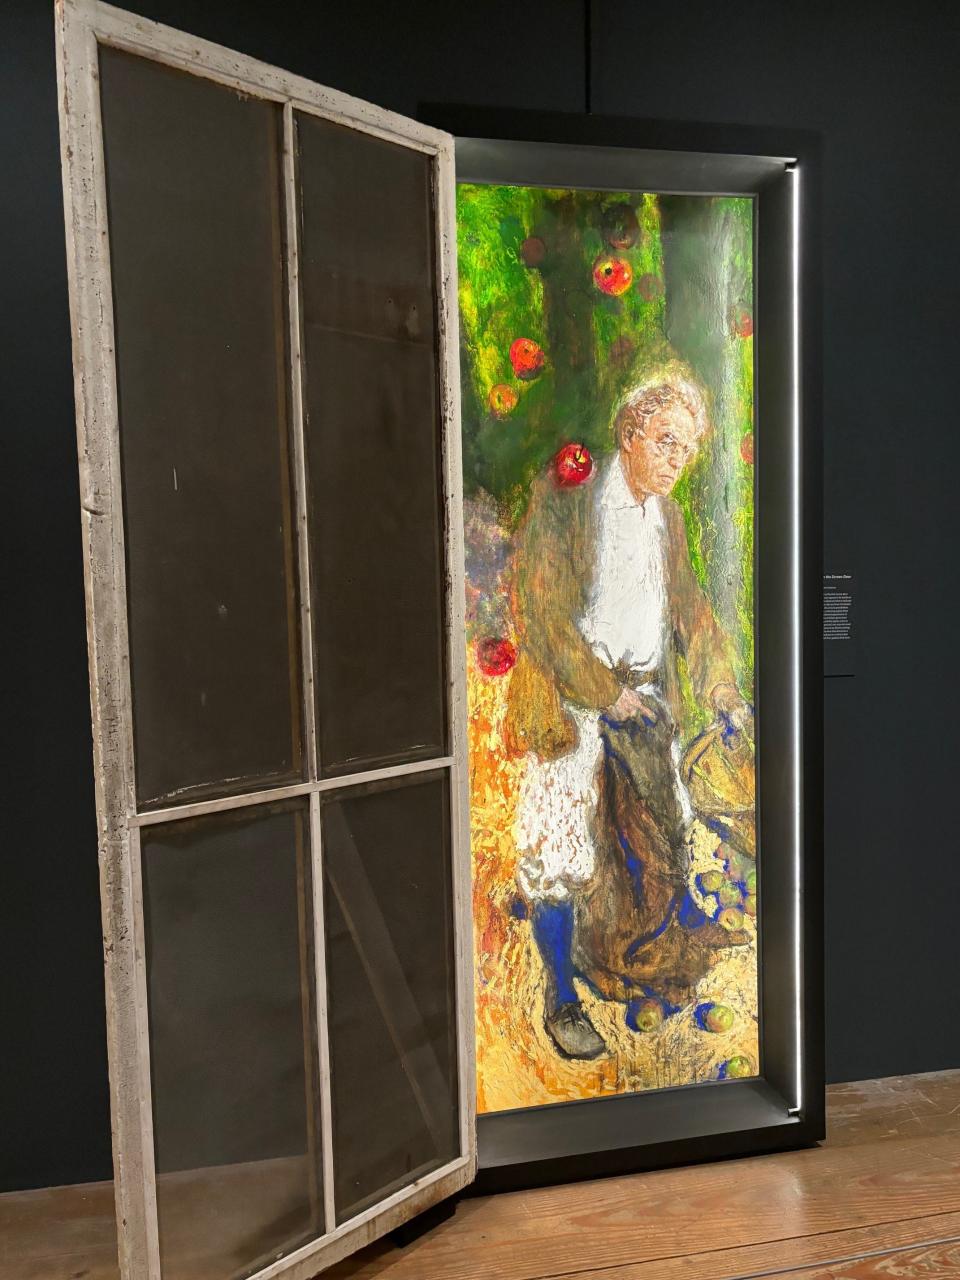 "Apples: Fifth in the Screen Door Sequence, 2021" by Jamie Wyeth shows his grandfather N.C. Wyeth gathering apples in an eternal autumn. It's included in the exhibition "Jamie Wyeth: Unsettled" that opened March 17, 2024, at the Brandywine Museum.